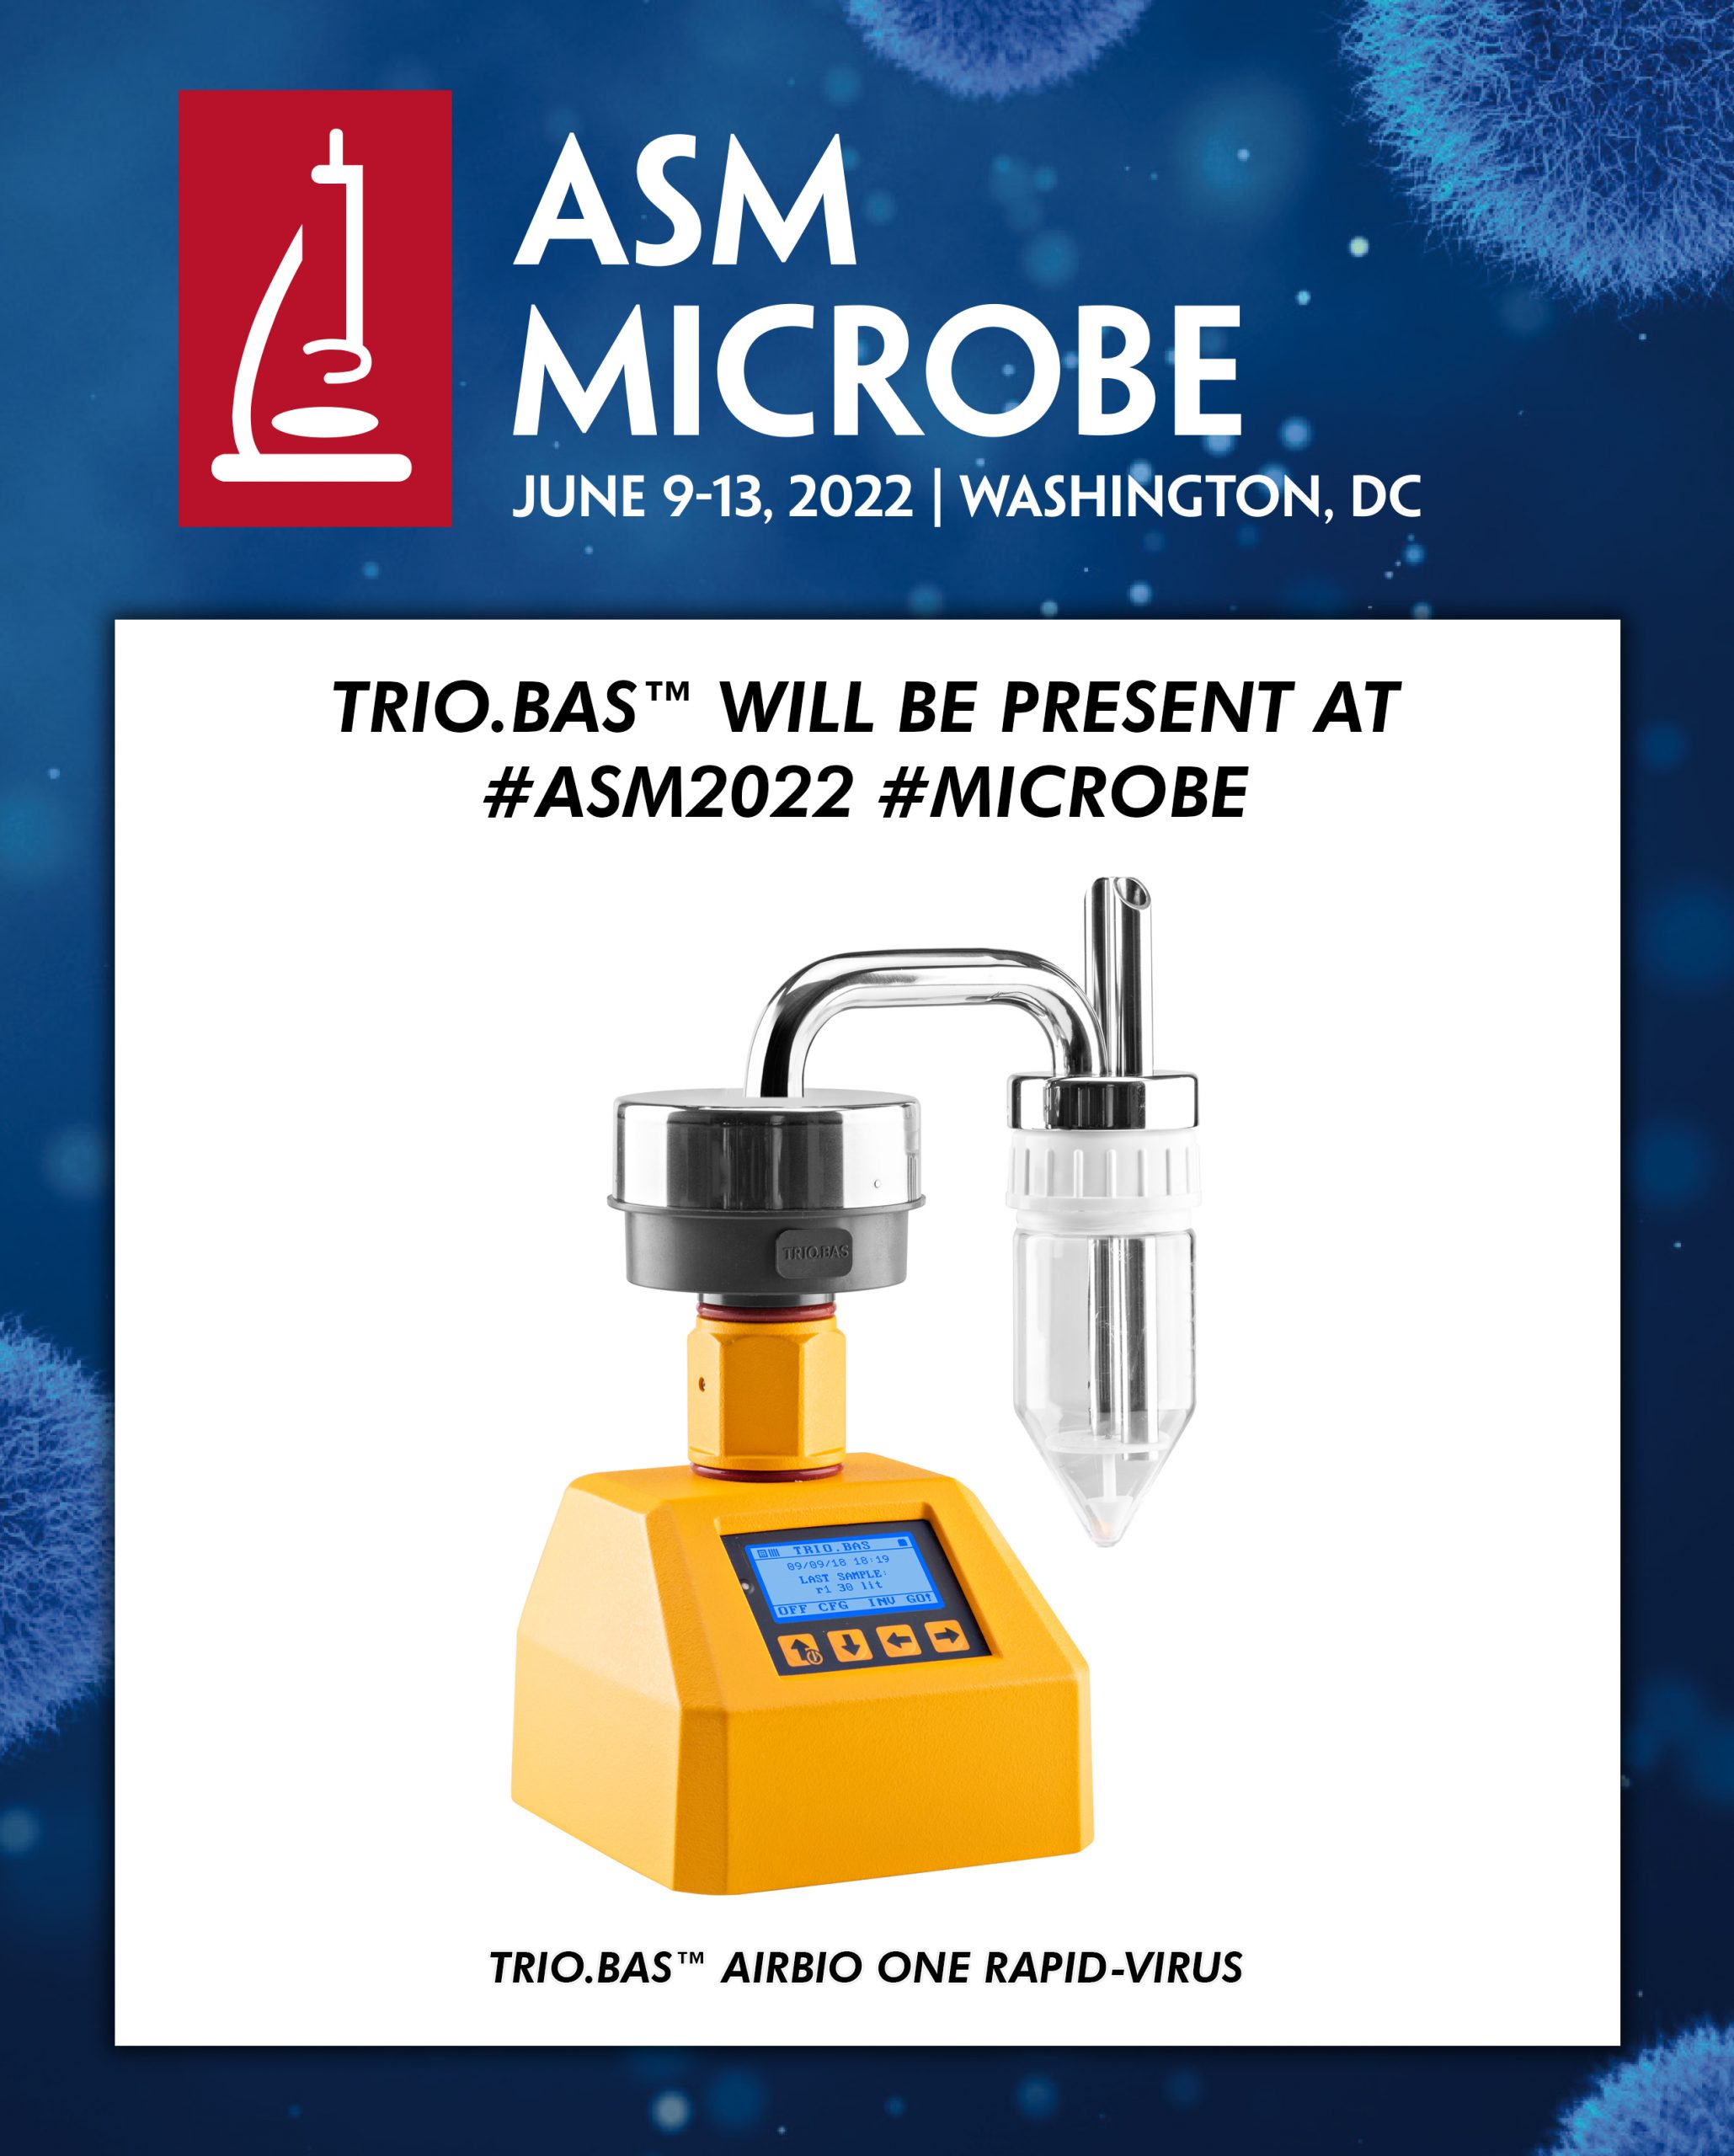 We will be present at the ASM Microbe 2022 ORUM INTERNATIONAL © All rights reserved.